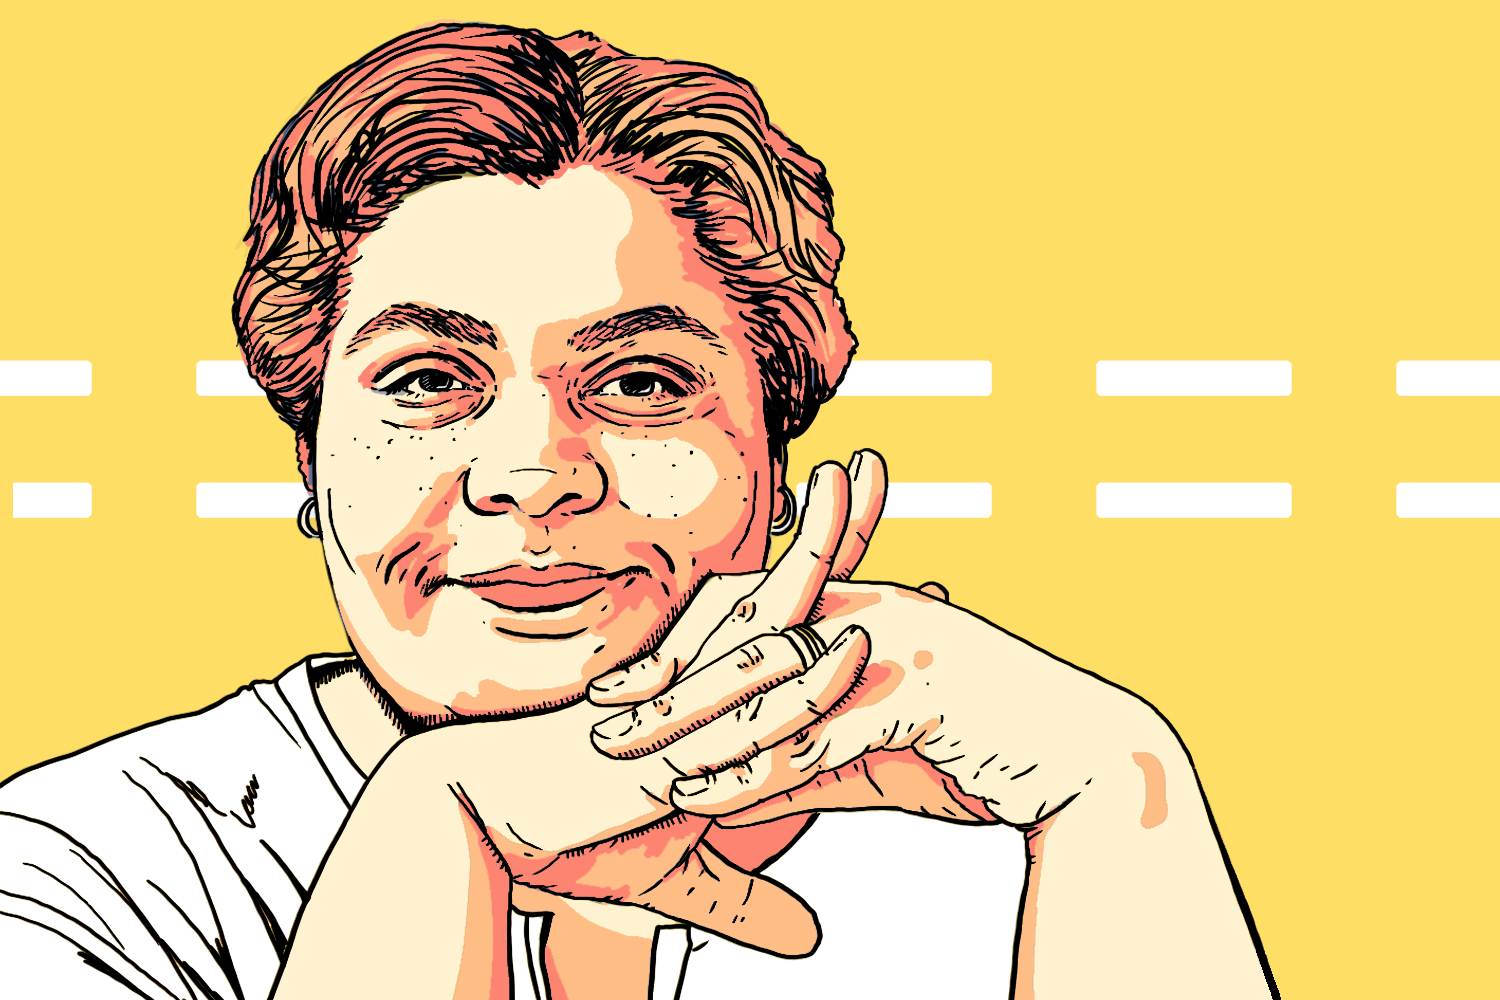 Roxane Gay: ‘If I was waiting for confidence to write, I’d still be waiting‘